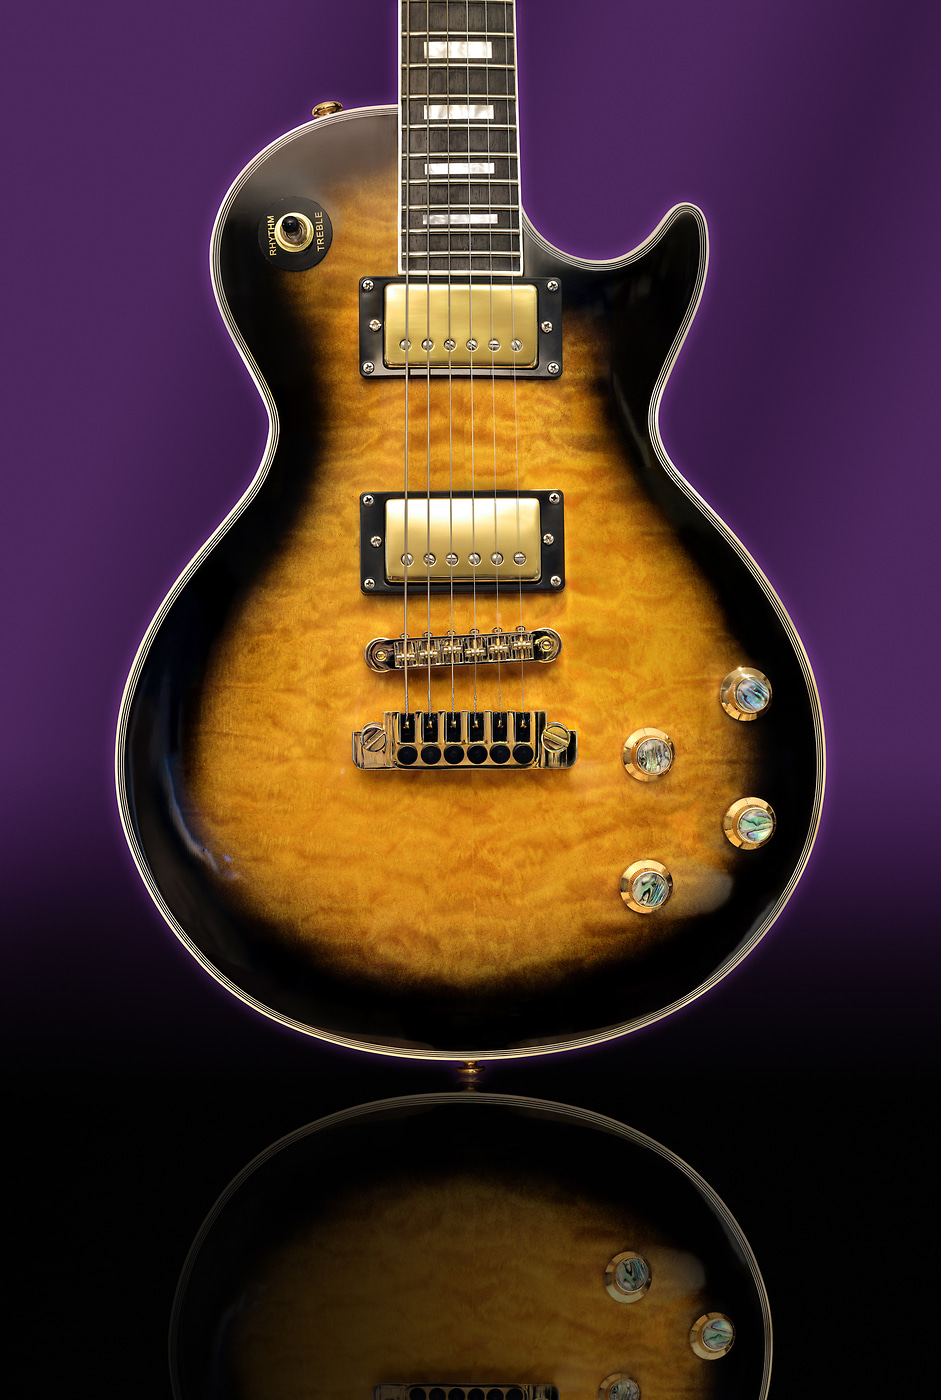 238 megapixels! A very high resolution artistic photograph of a Gibson Les Paul guitar; VAST photo created by Phil Crawshay